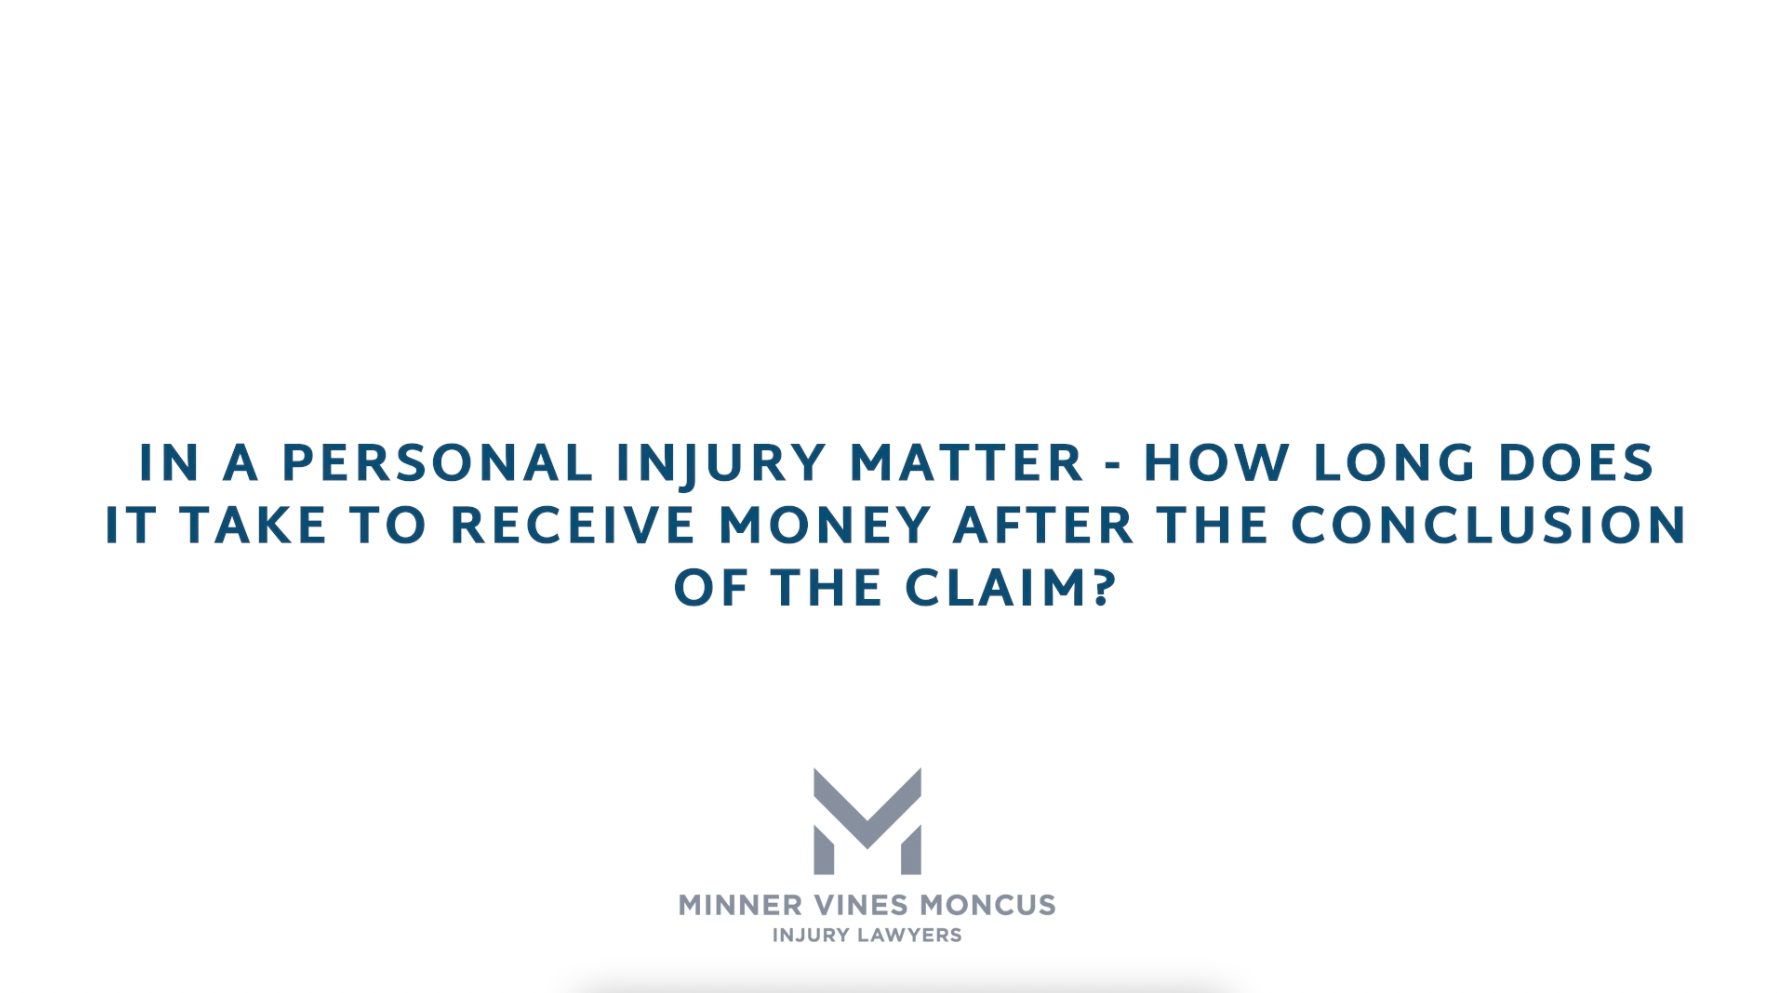 In a personal injury matter – how long does it take to receive money after the conclusion of the claim?